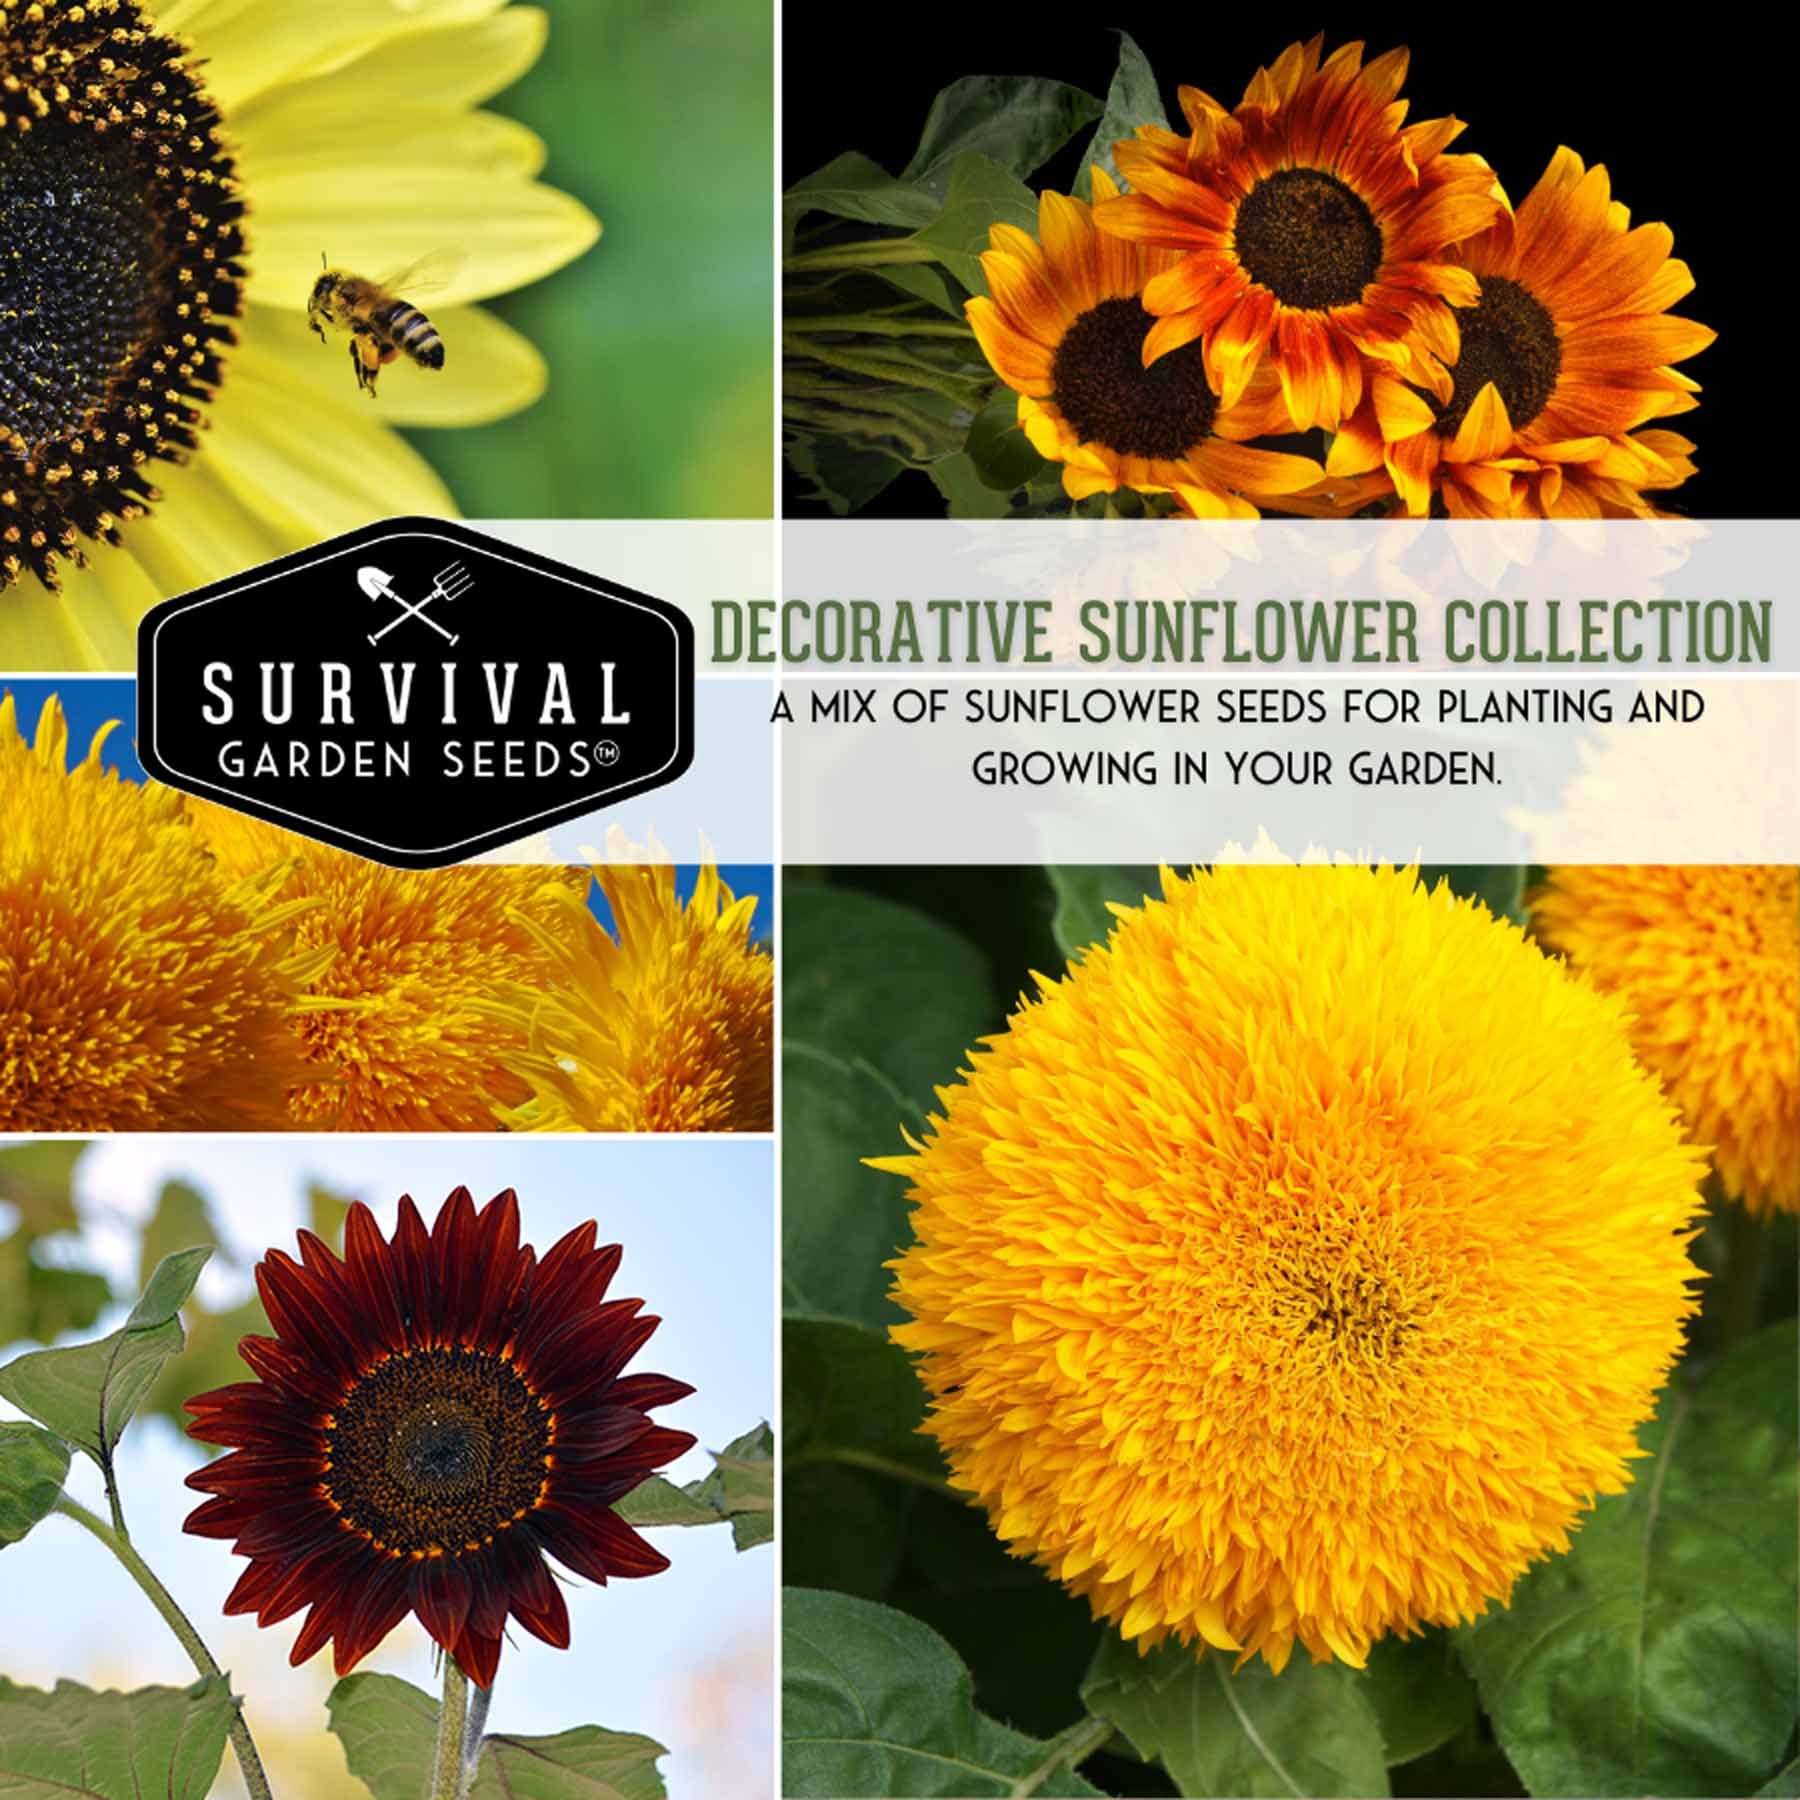 Decorative Sunflower Collection - 3 Varieties of colorful sunflowers